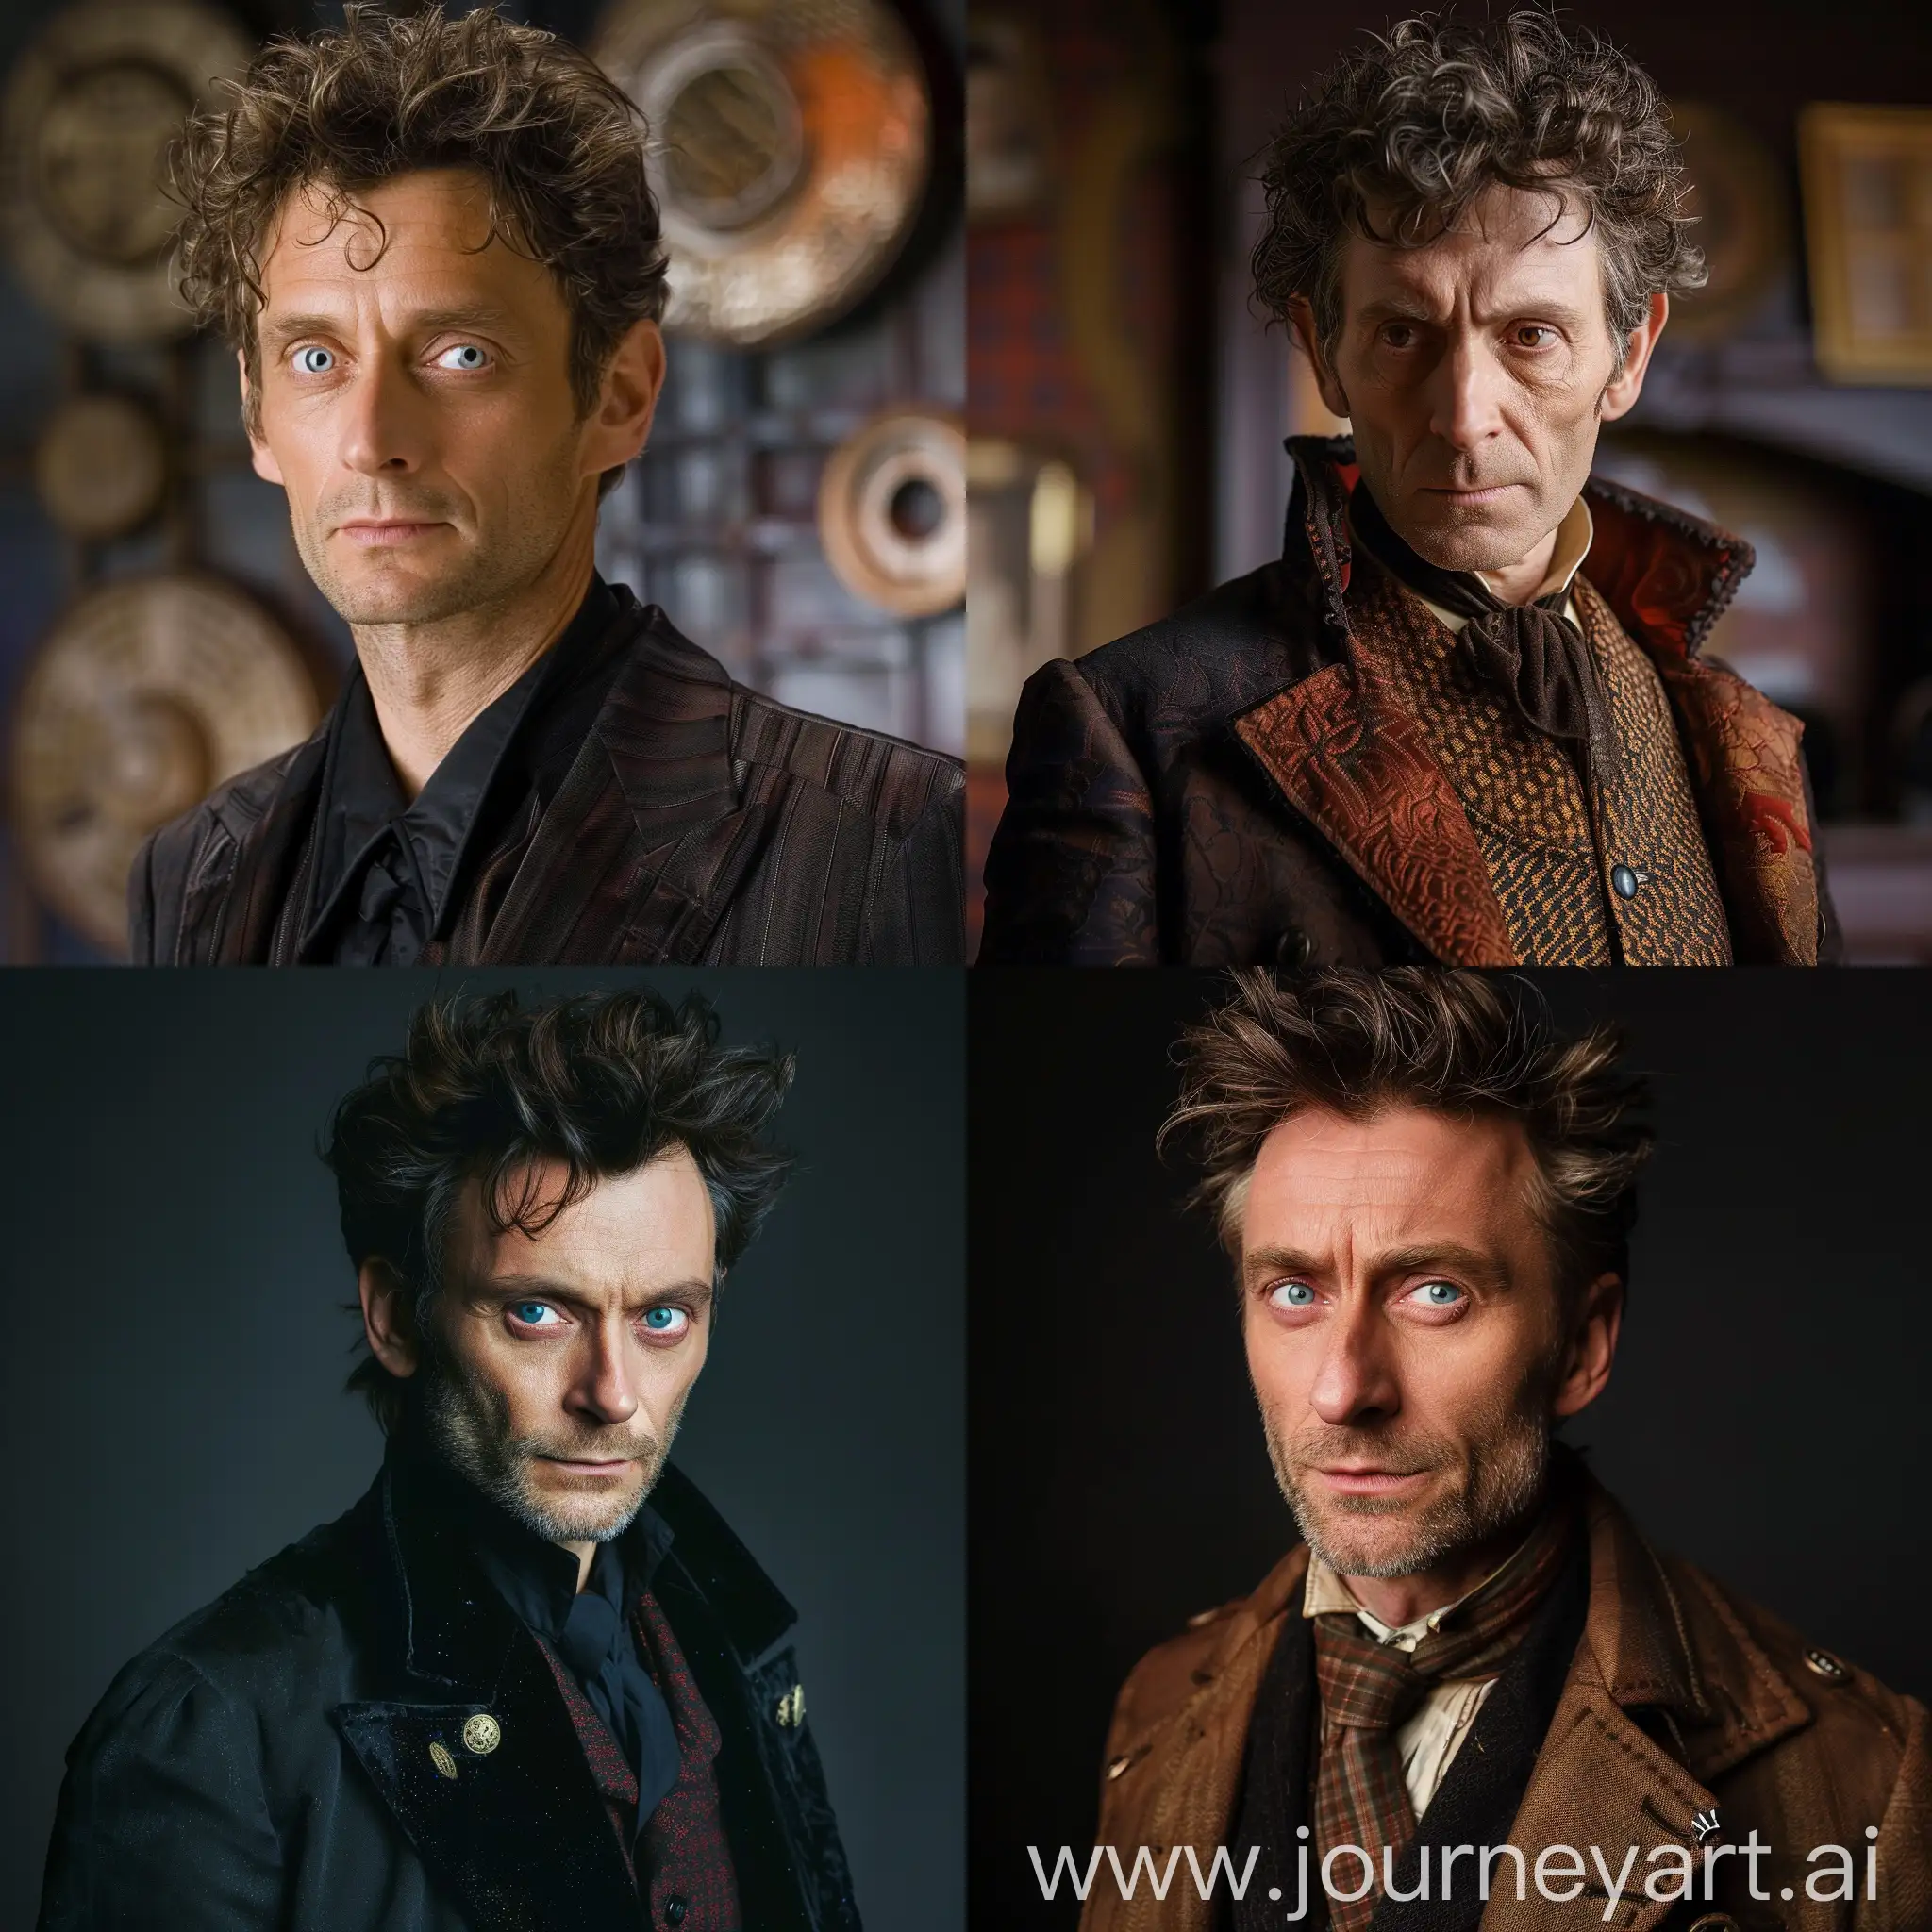 Michael Christopher Sheen as Doctor Who